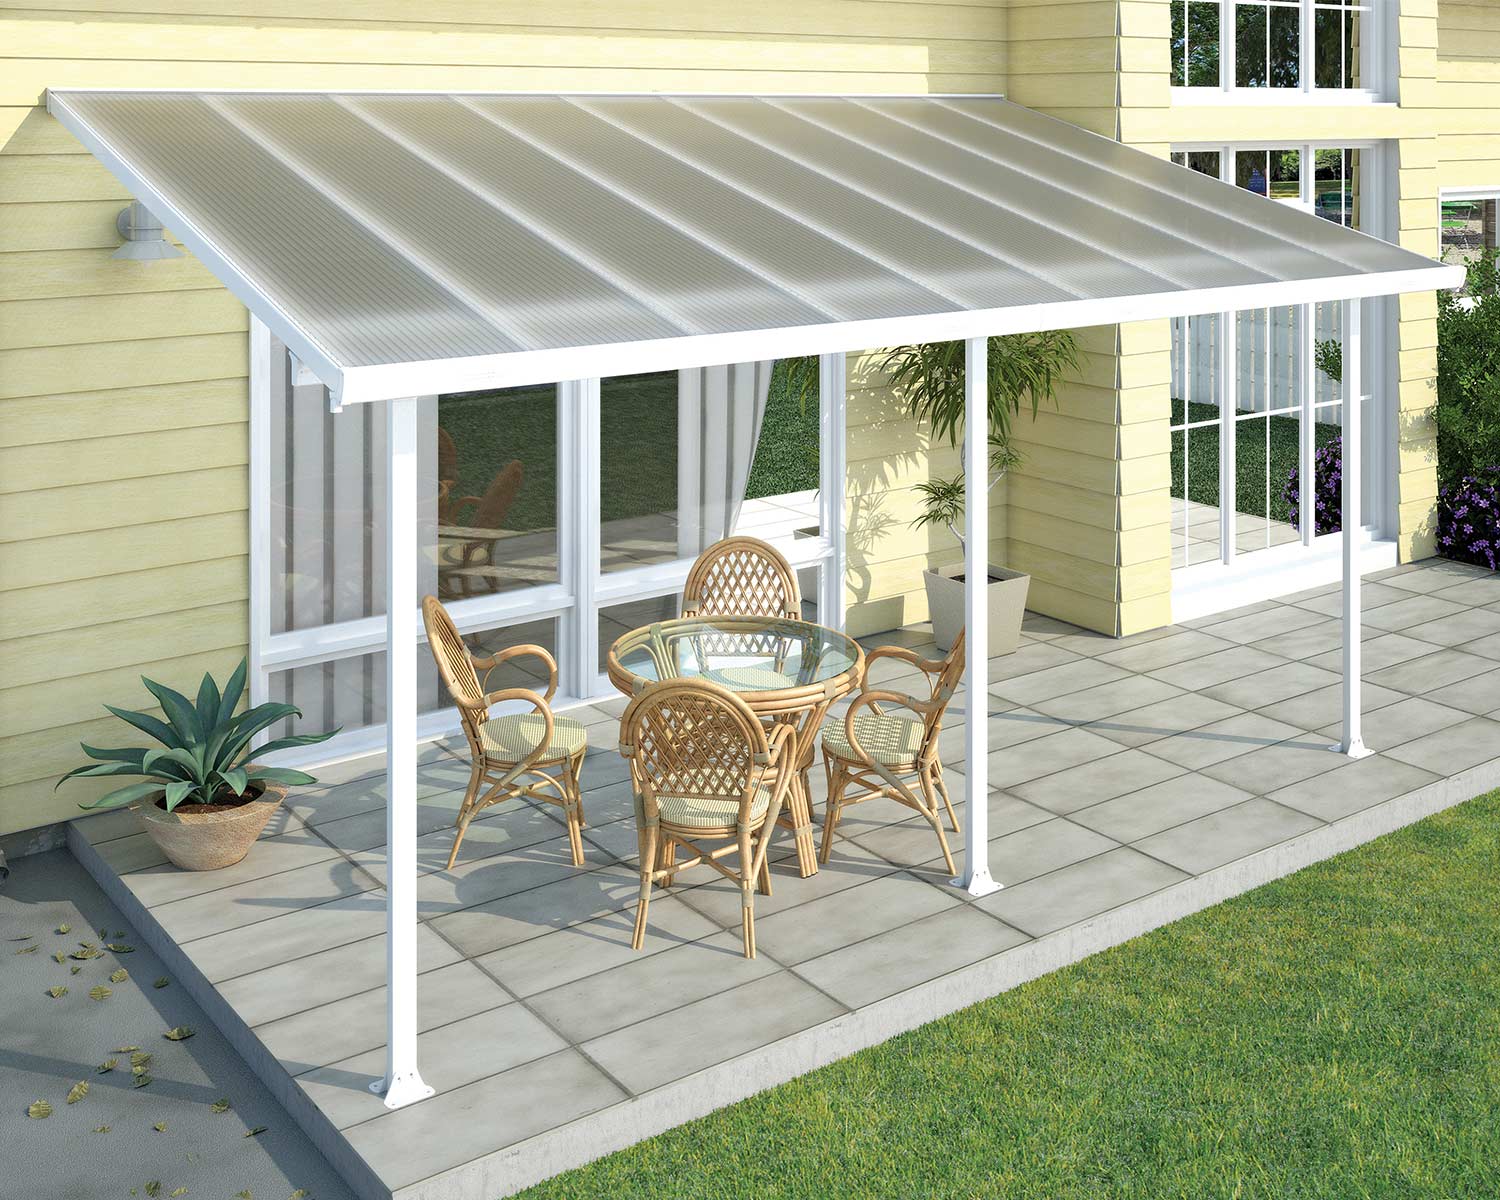 Patio Cover 10 ft. x 18 ft. Aluminium White with polycarbonate roof panels, attached to the house to protect patio furniture